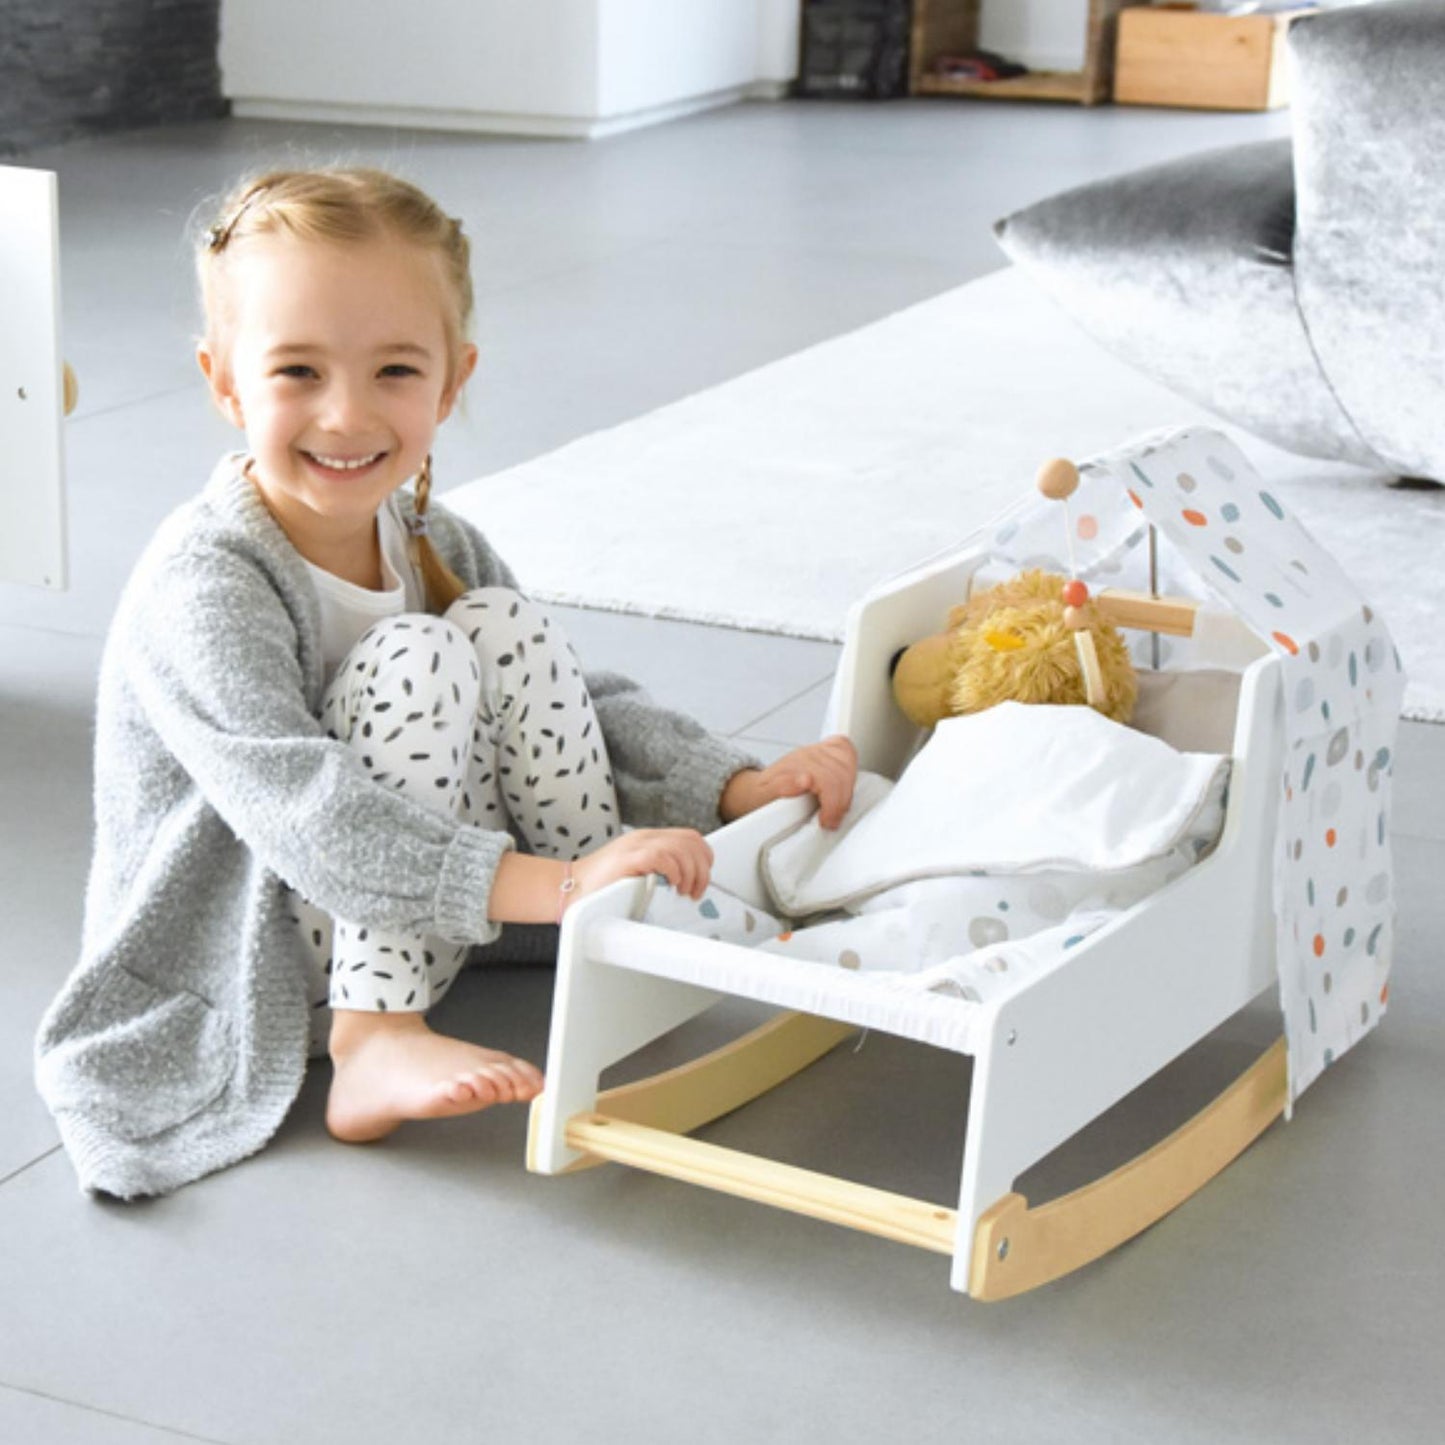 Small Foot Rocking Doll Cot | Wooden Pretend Play Toy for Kids | Lifestyle: Girl Playing with Doll’s Rocking Crib | BeoVERDE.ie